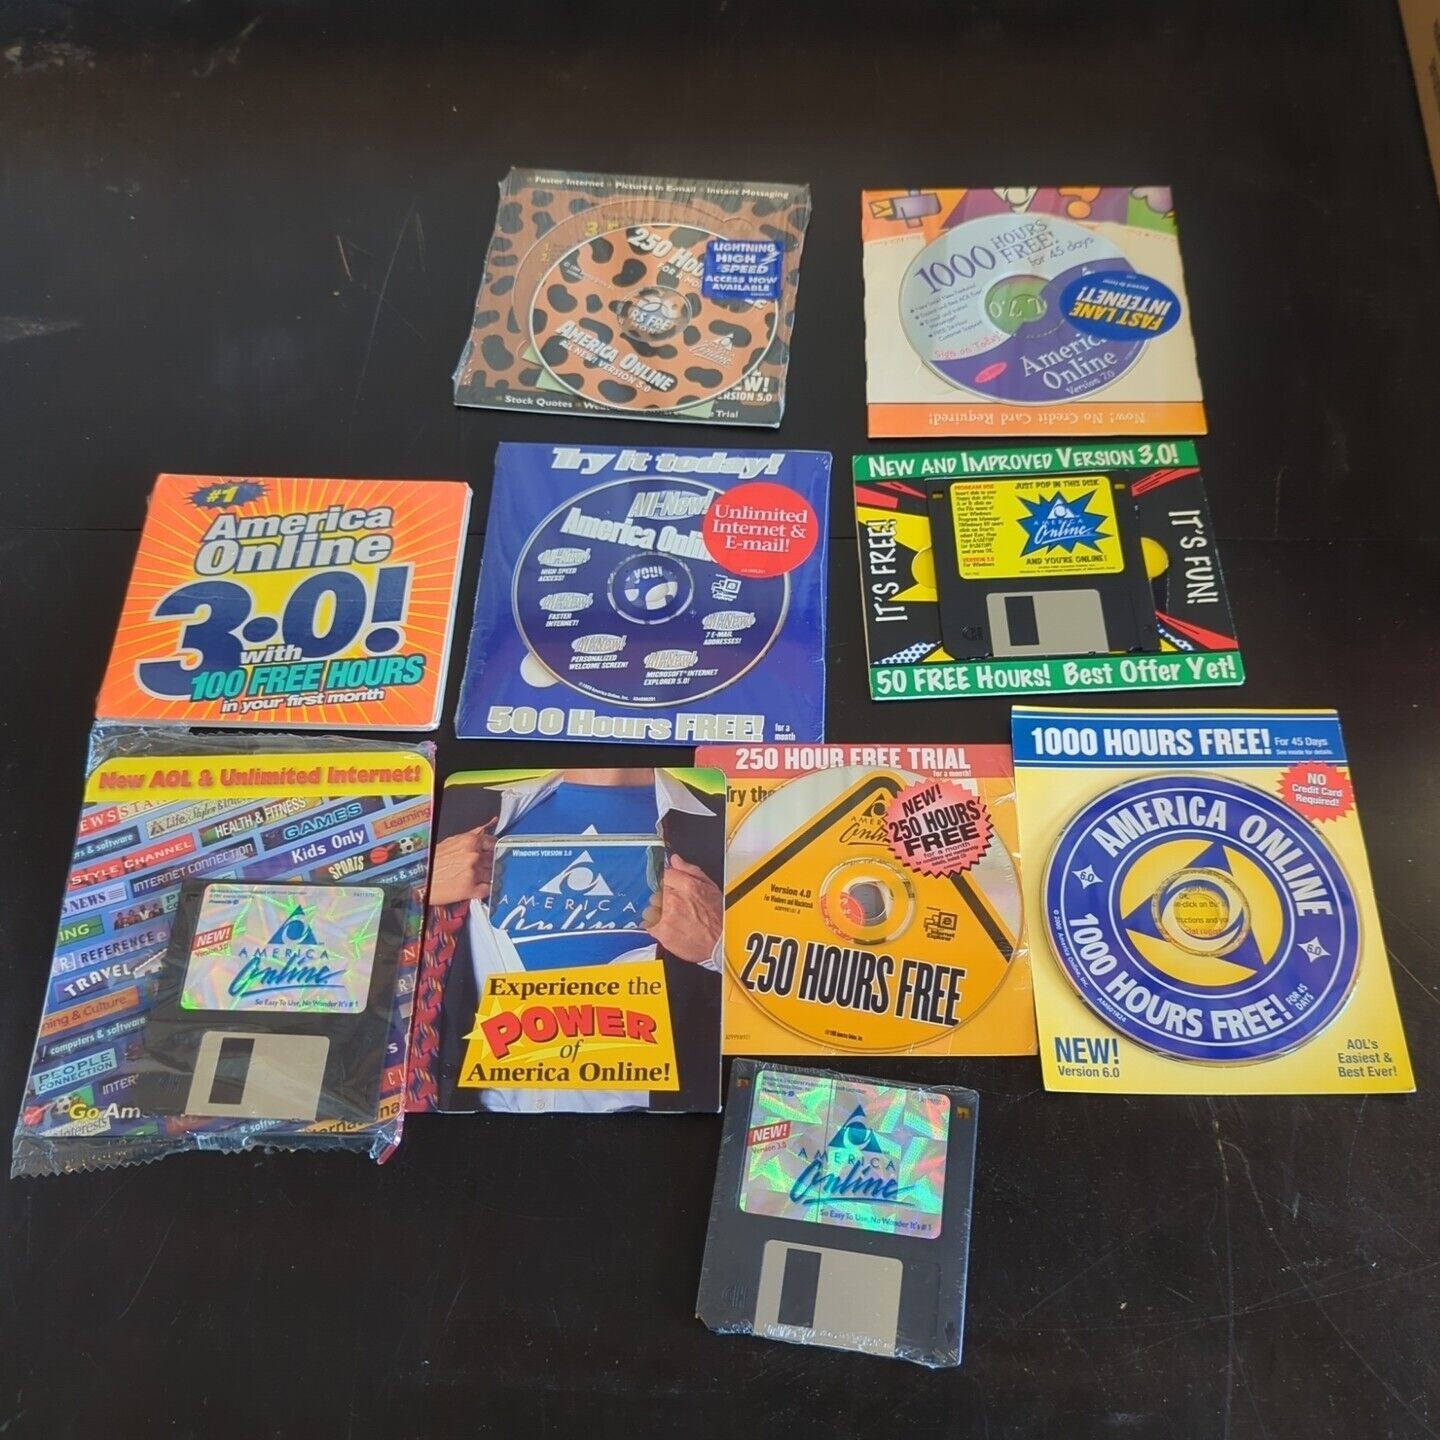 Various old AOL CDs and floppy disks are spread on a surface, advertising free hours of internet service ranging from 50 to 1000 hours